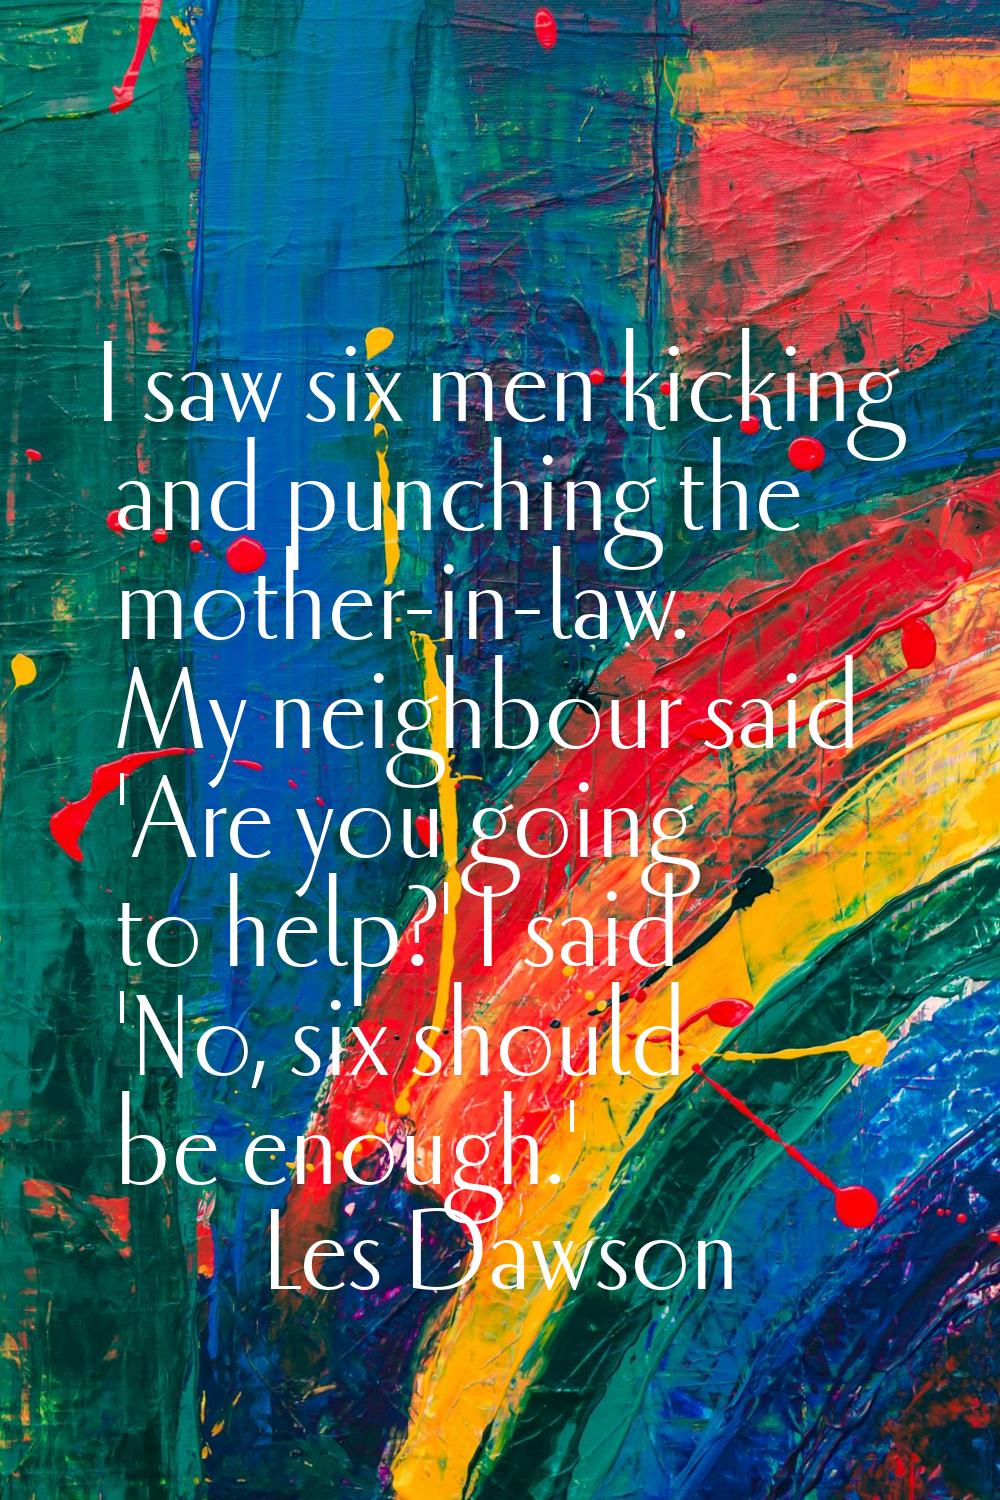 I saw six men kicking and punching the mother-in-law. My neighbour said 'Are you going to help?' I 